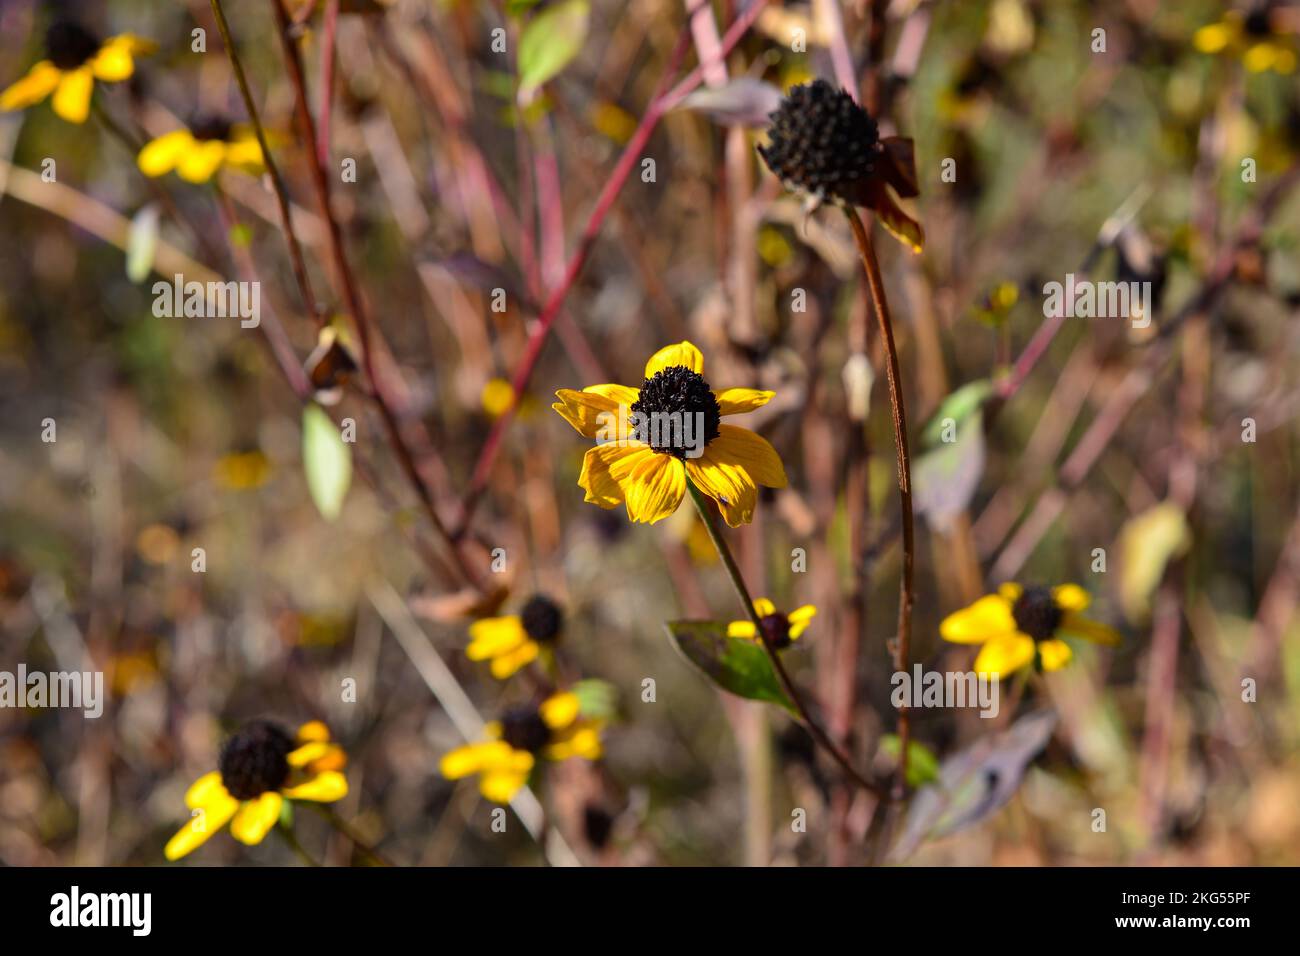 Rudbeckia shaggy with yellow petals blooms in the garden in autumn Stock Photo